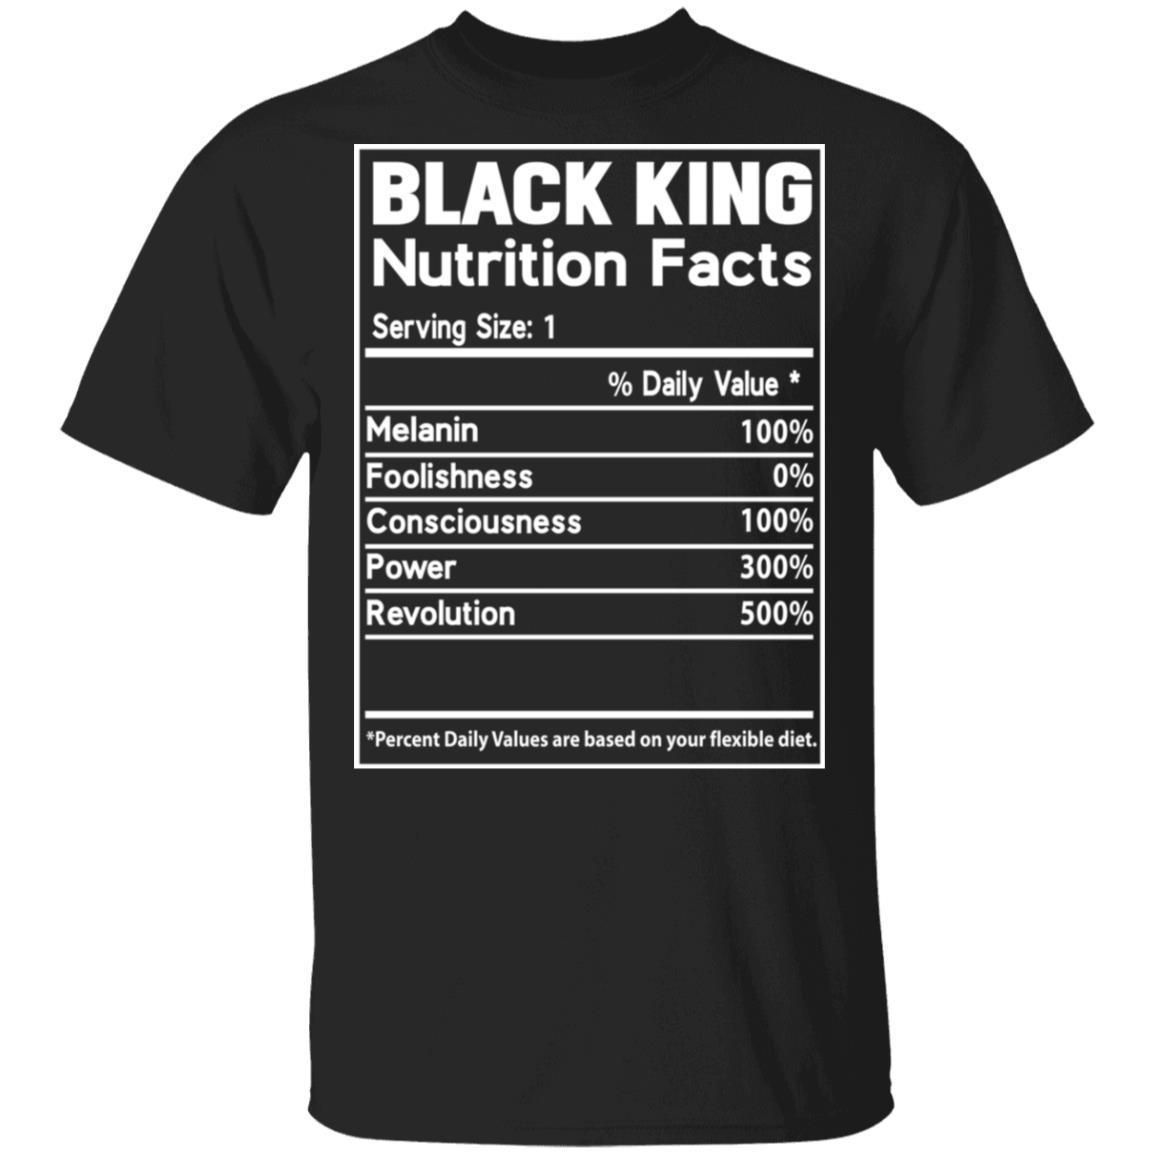 Black King Nutrition Facts T-shirt